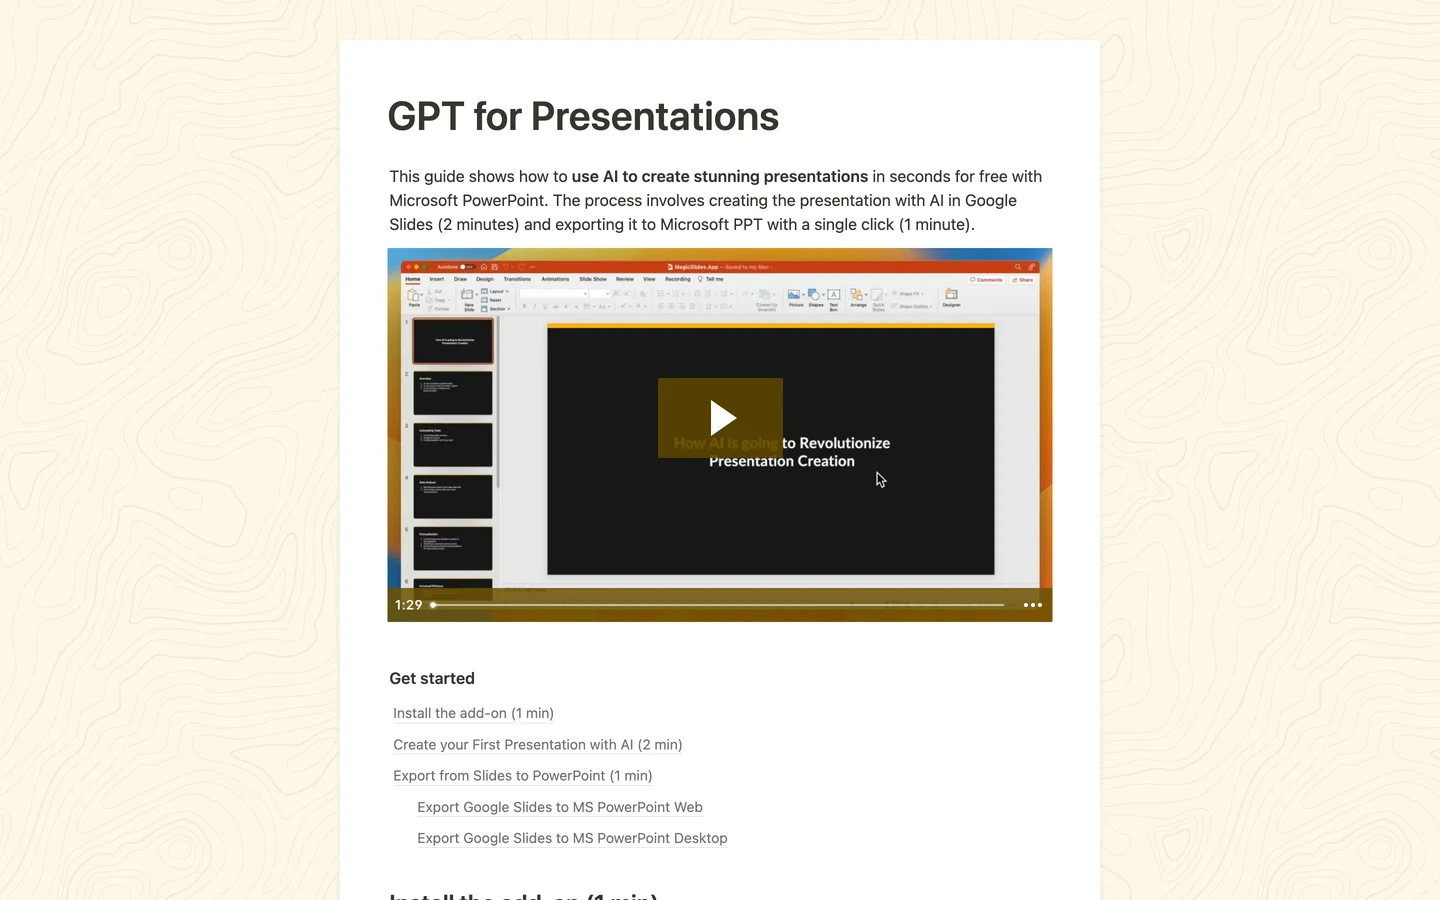 GPT for Presentations - Create Presentation With AI in seconds